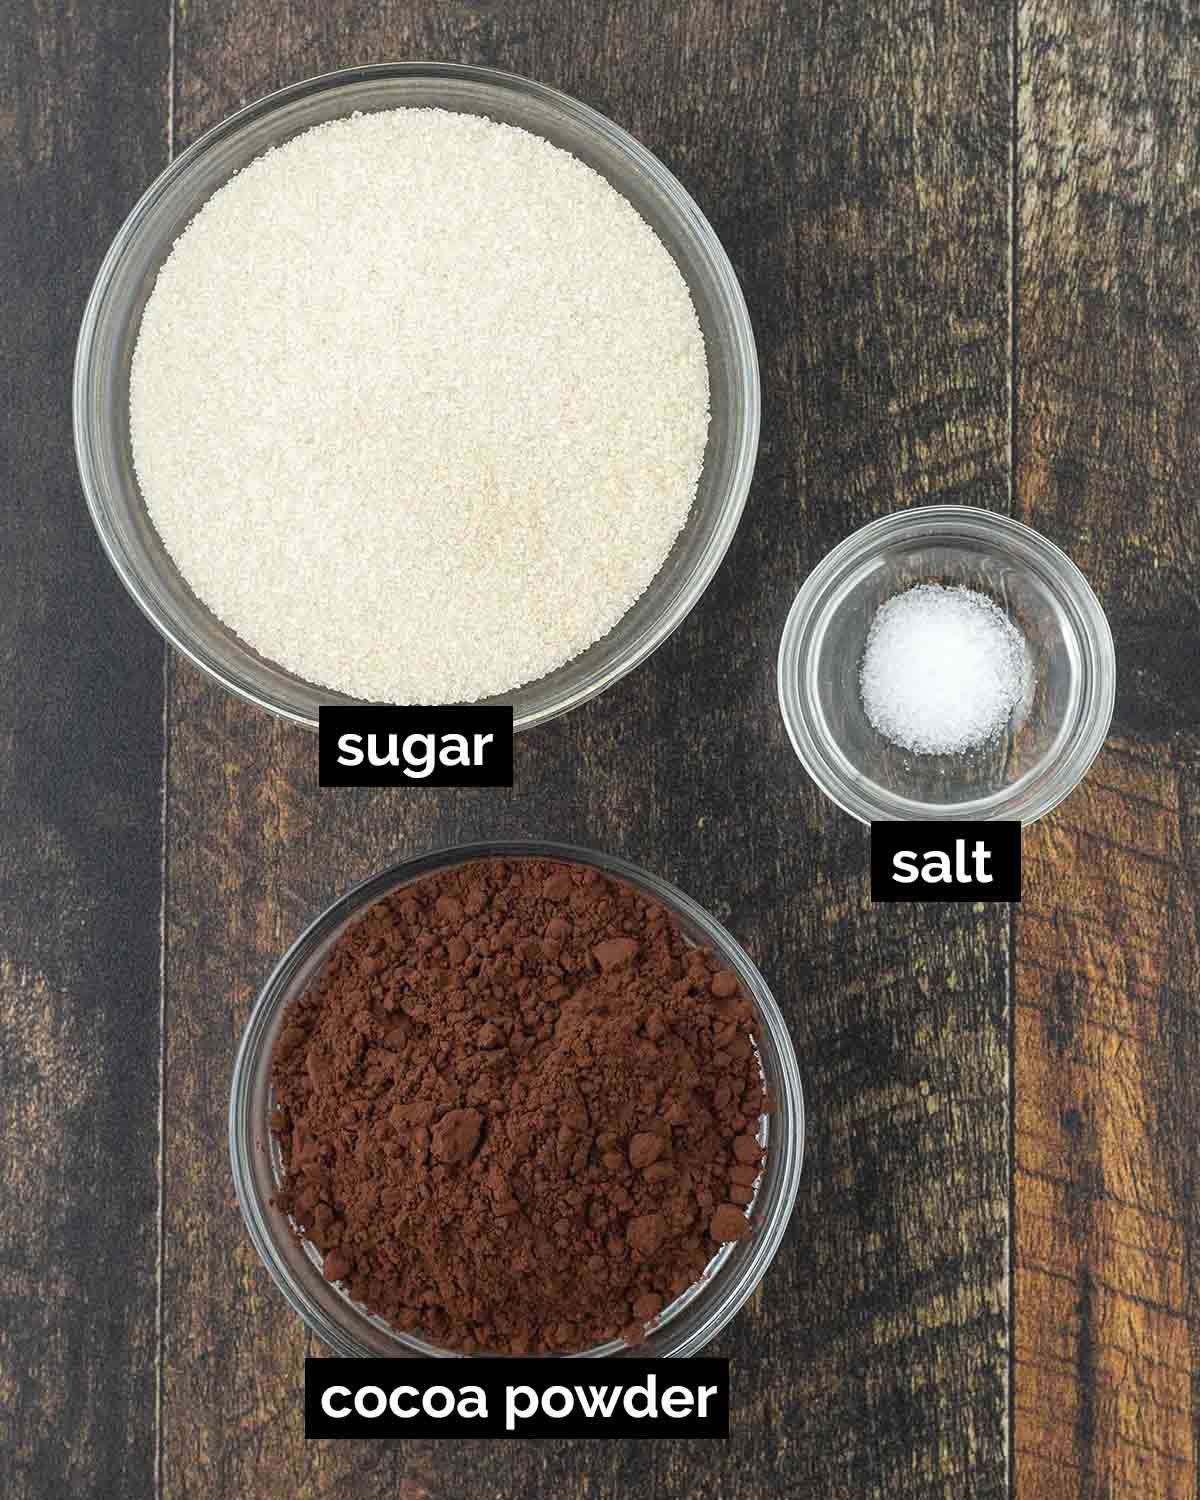 An overhead shot showing the ingredients needed to make a vegan hot cocoa mix.